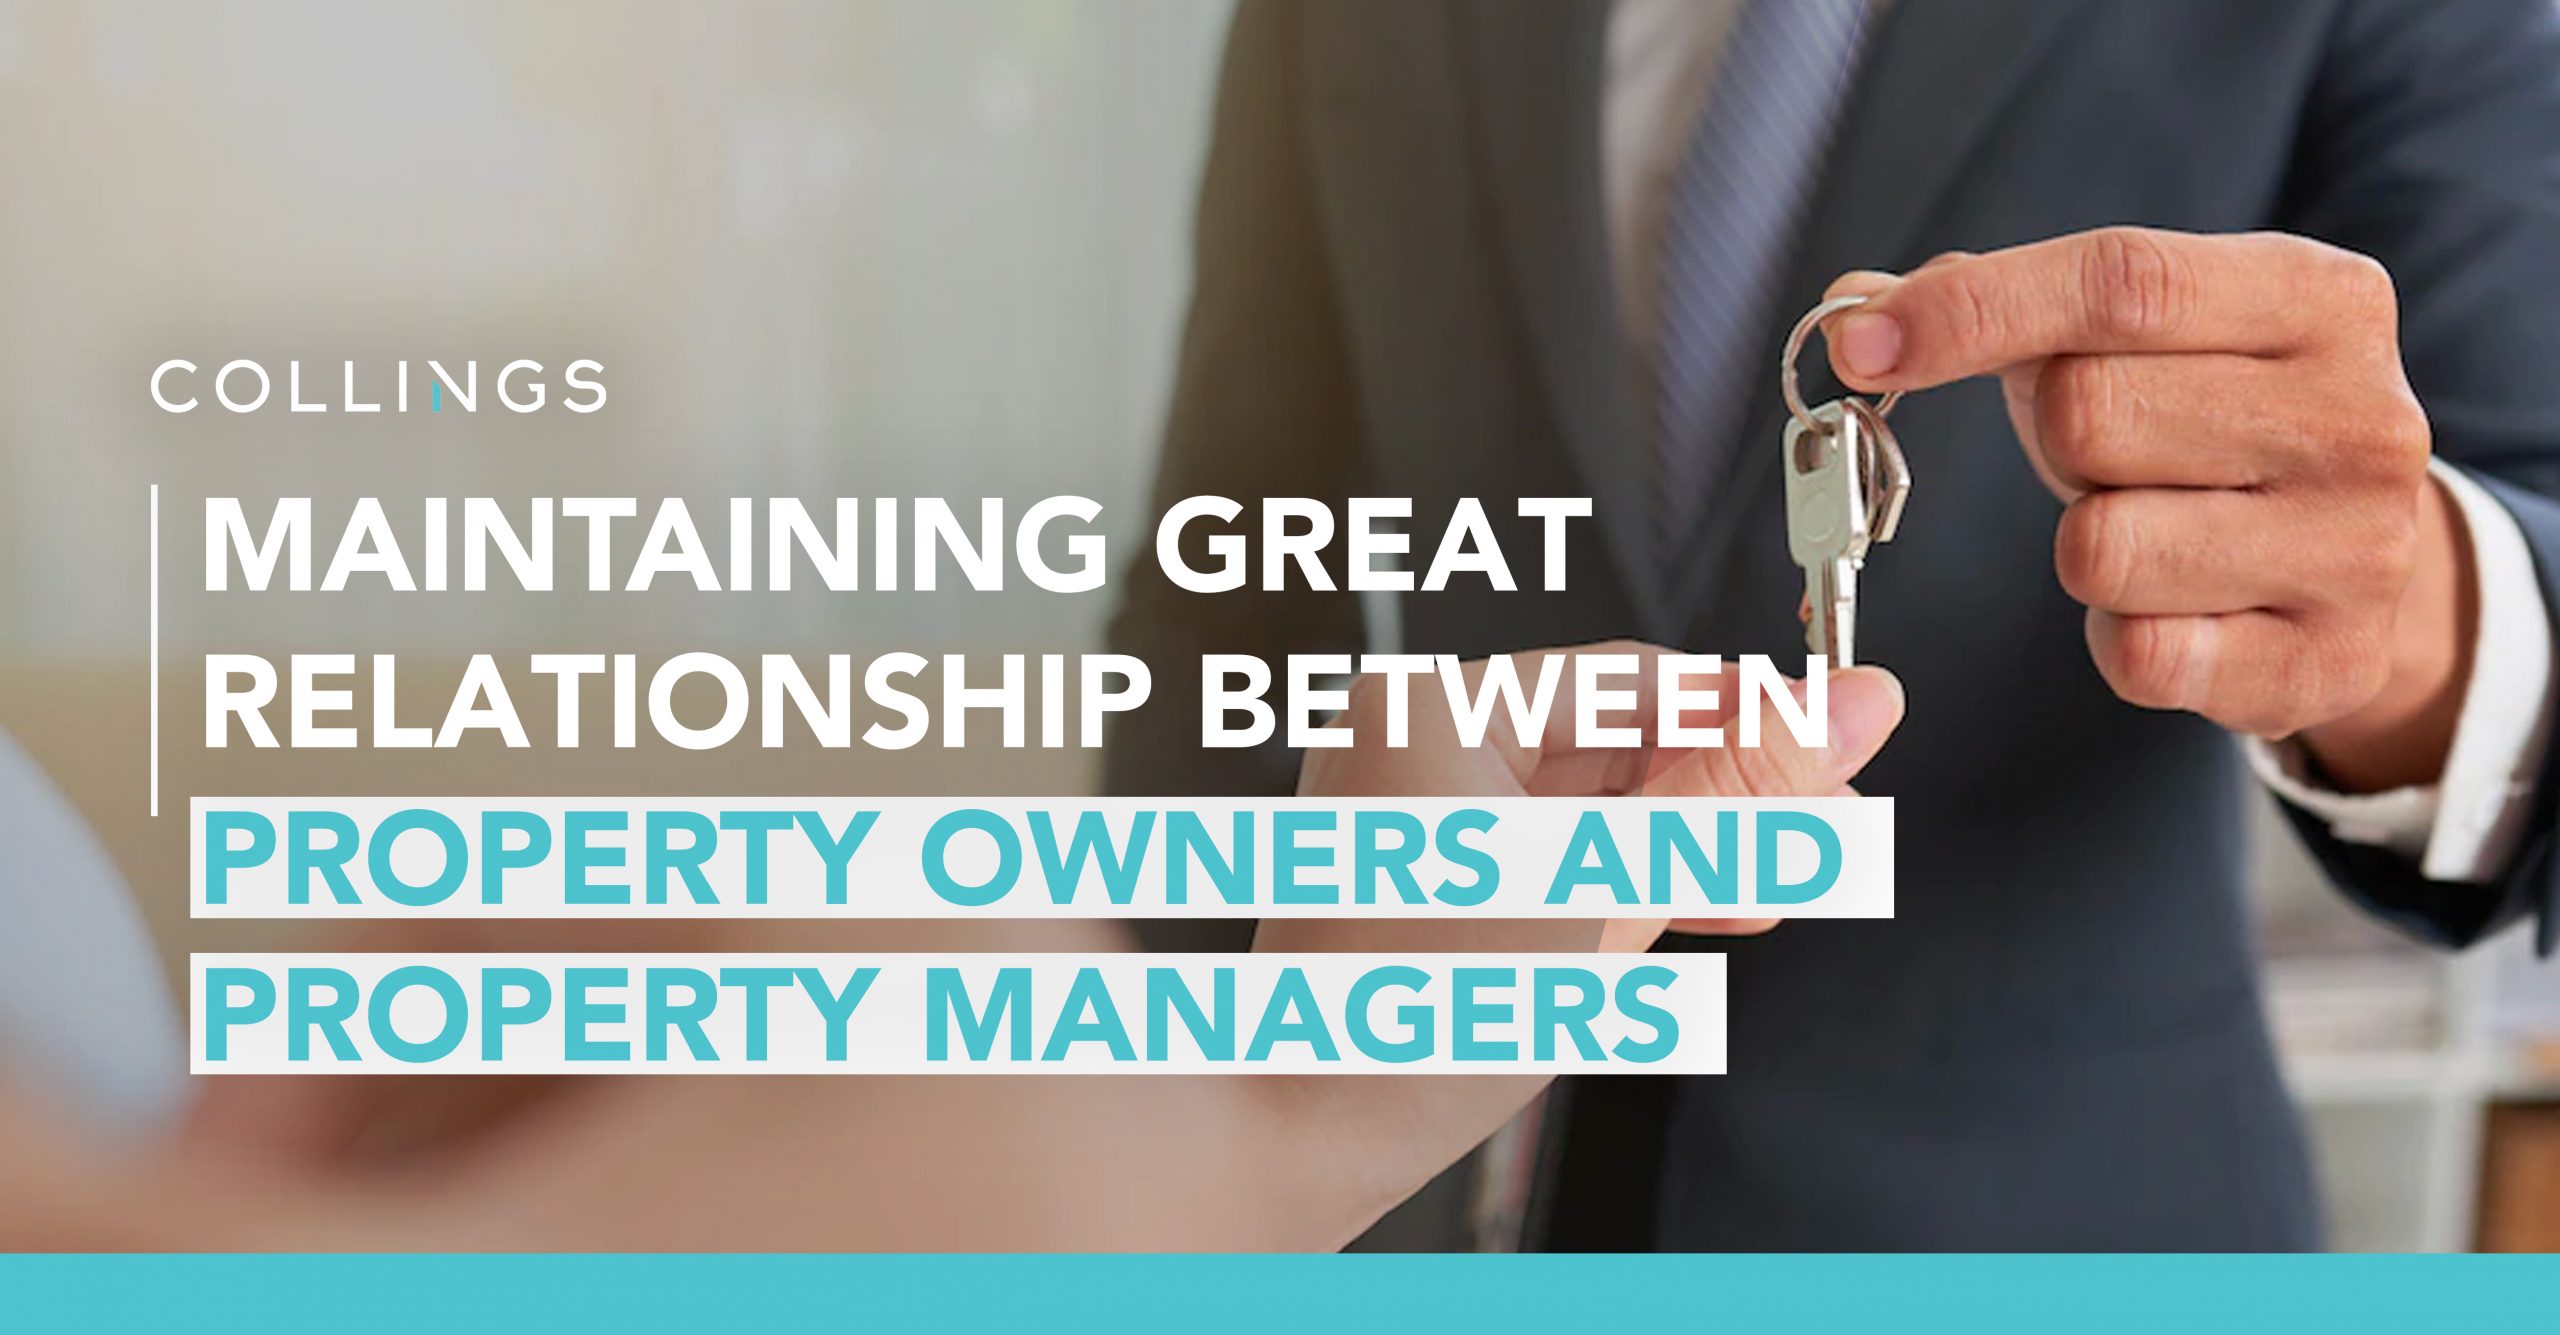 Maintaining Great Relationship Between Property Owners and Property Managers